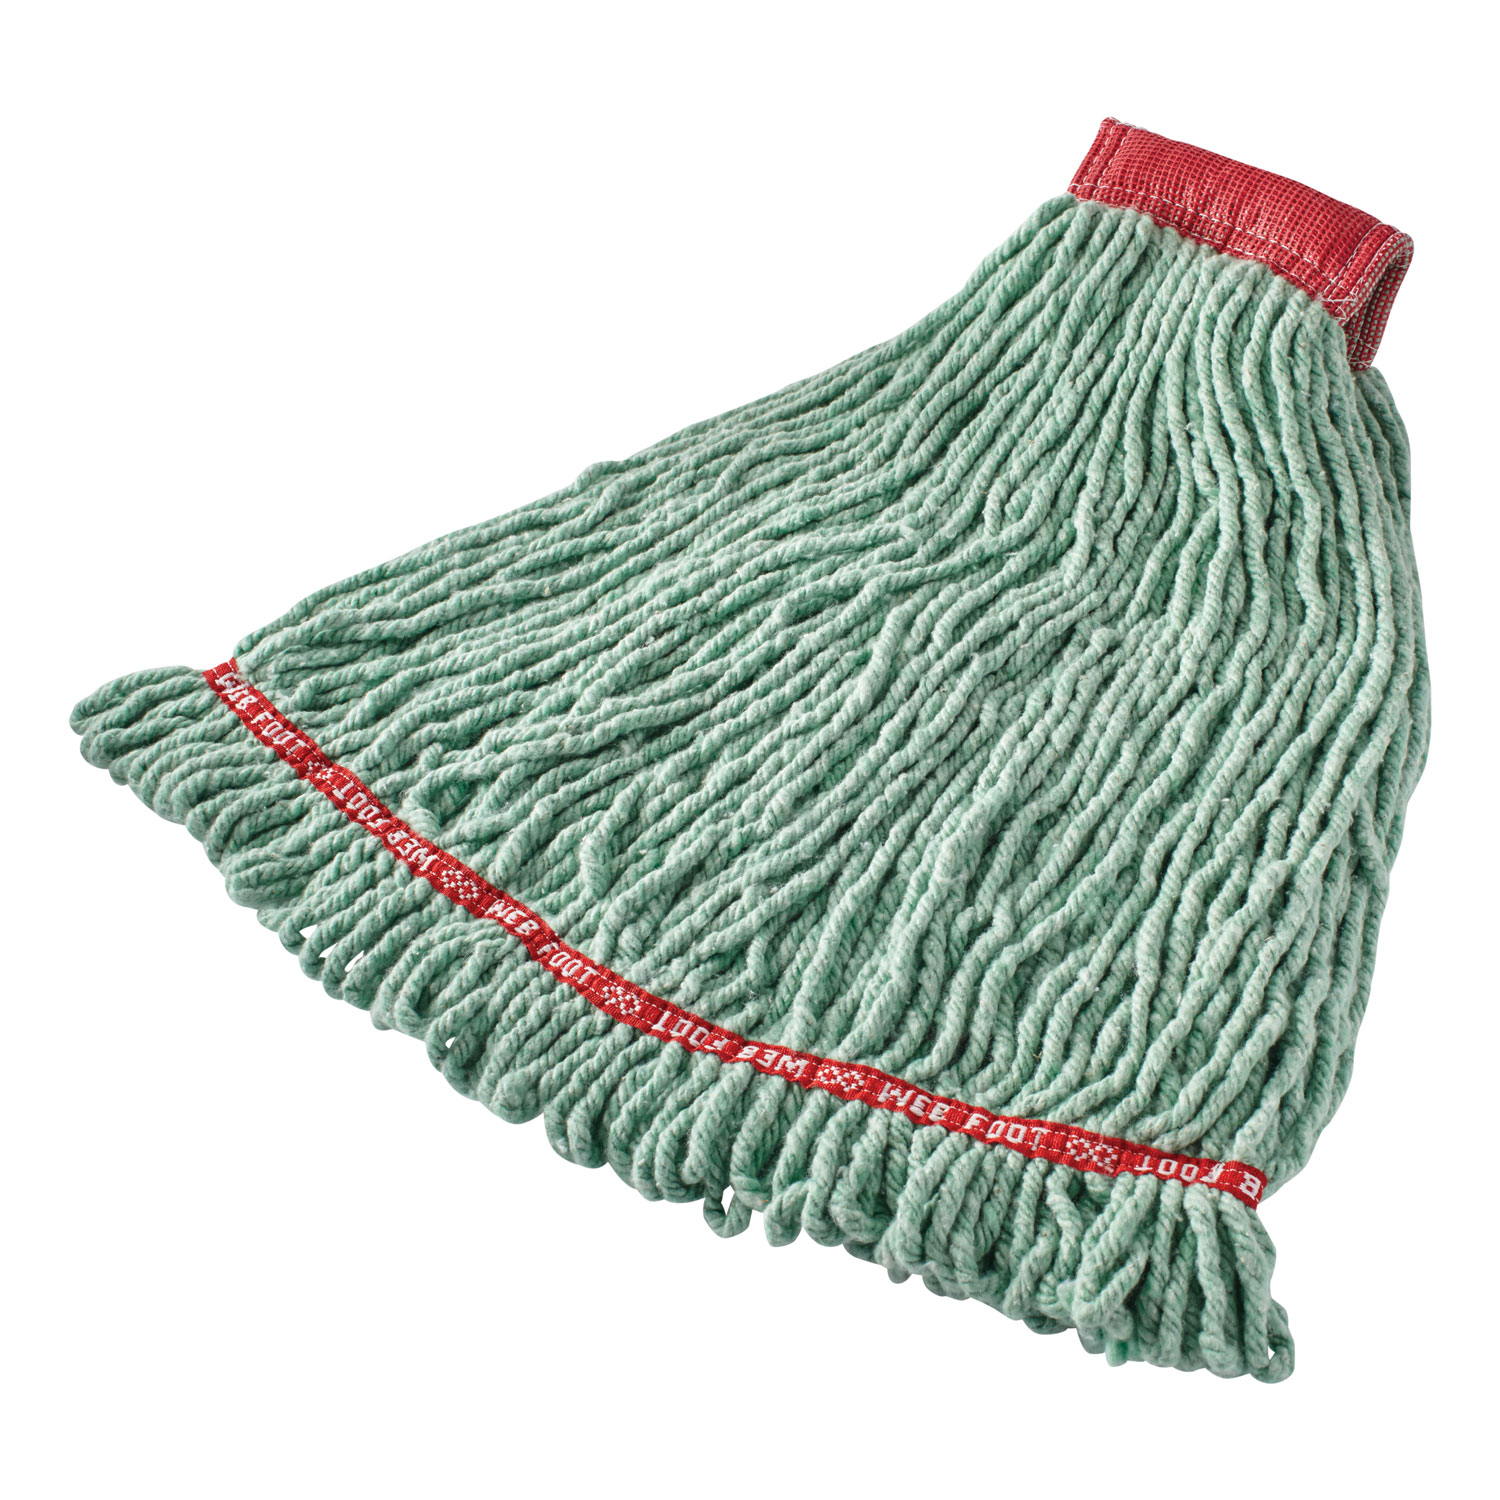  Rubbermaid Commercial FGA25306GR00 Web Foot Shrinkless Looped-End Wet Mop Head, Cotton/Synthetic, Large, Green, 5 Red Headband (RCPA25306GR00) 